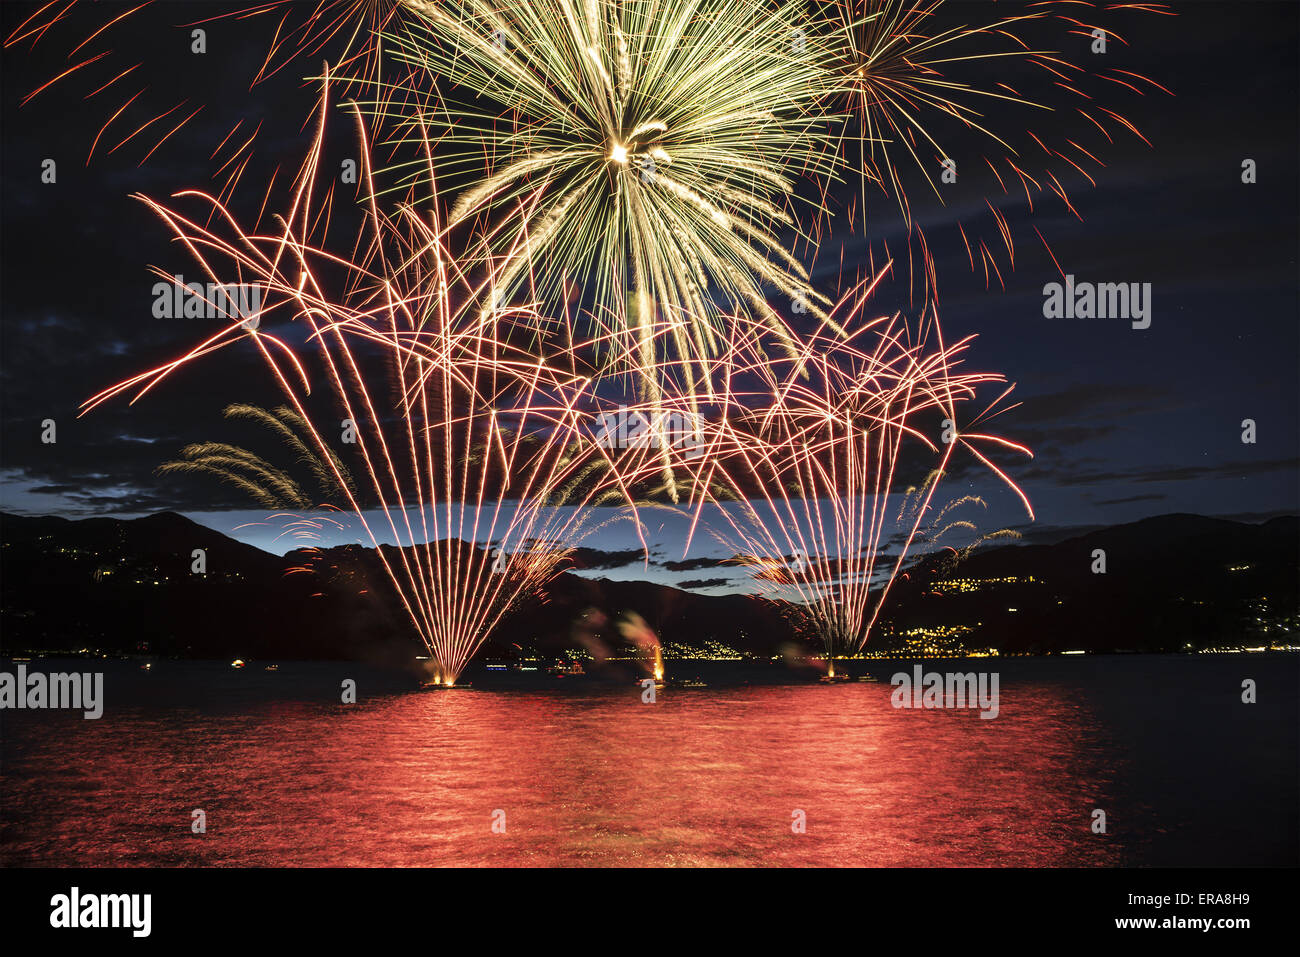 Lakefront Luino fireworks on the Maggiore lake in summer evening, Lombardy - Italy Stock Photo